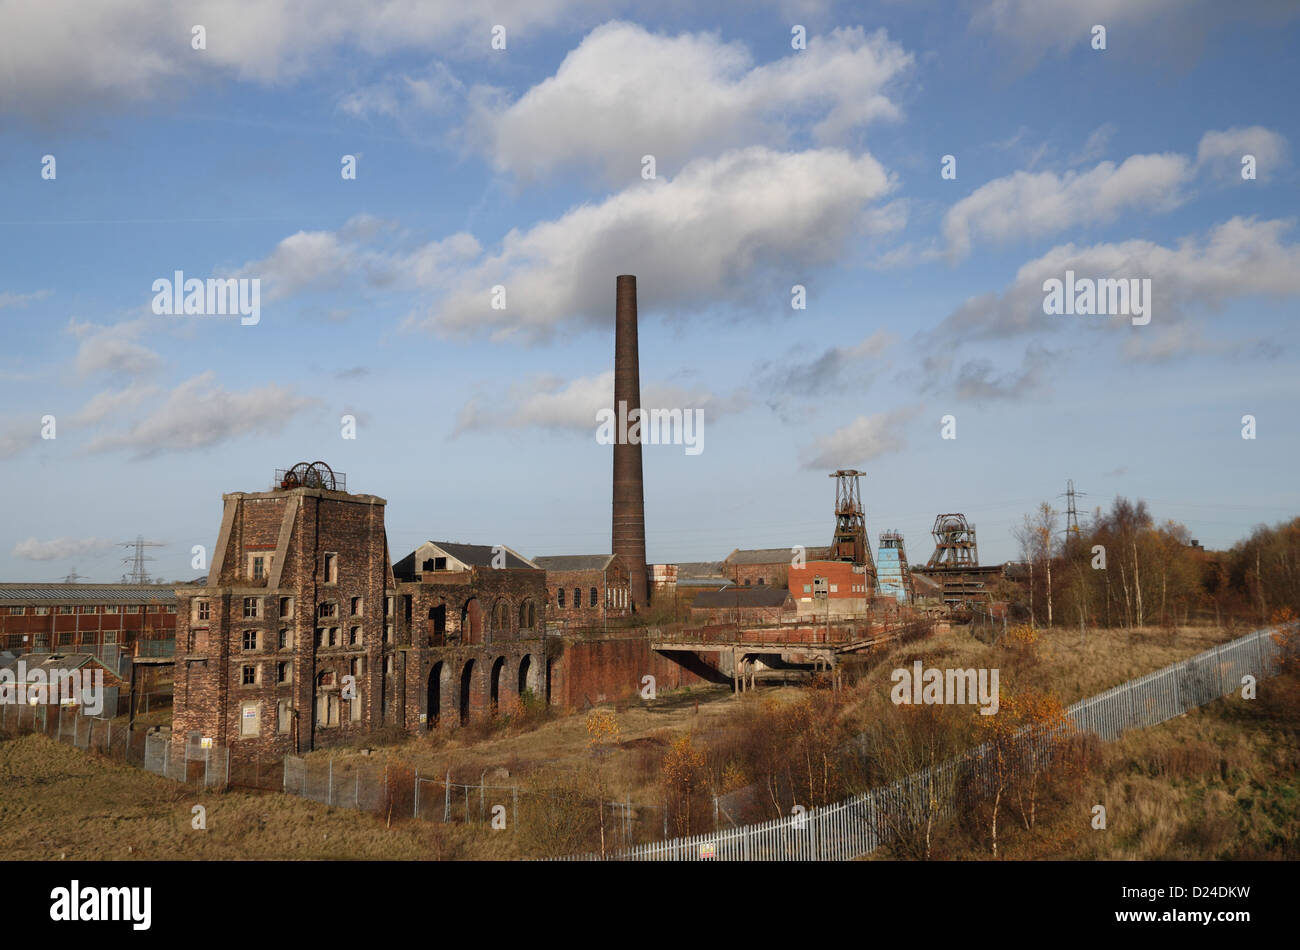 Chatterley Whitfield coal mine, now closed, Stoke-on-Trent, UK Stock Photo